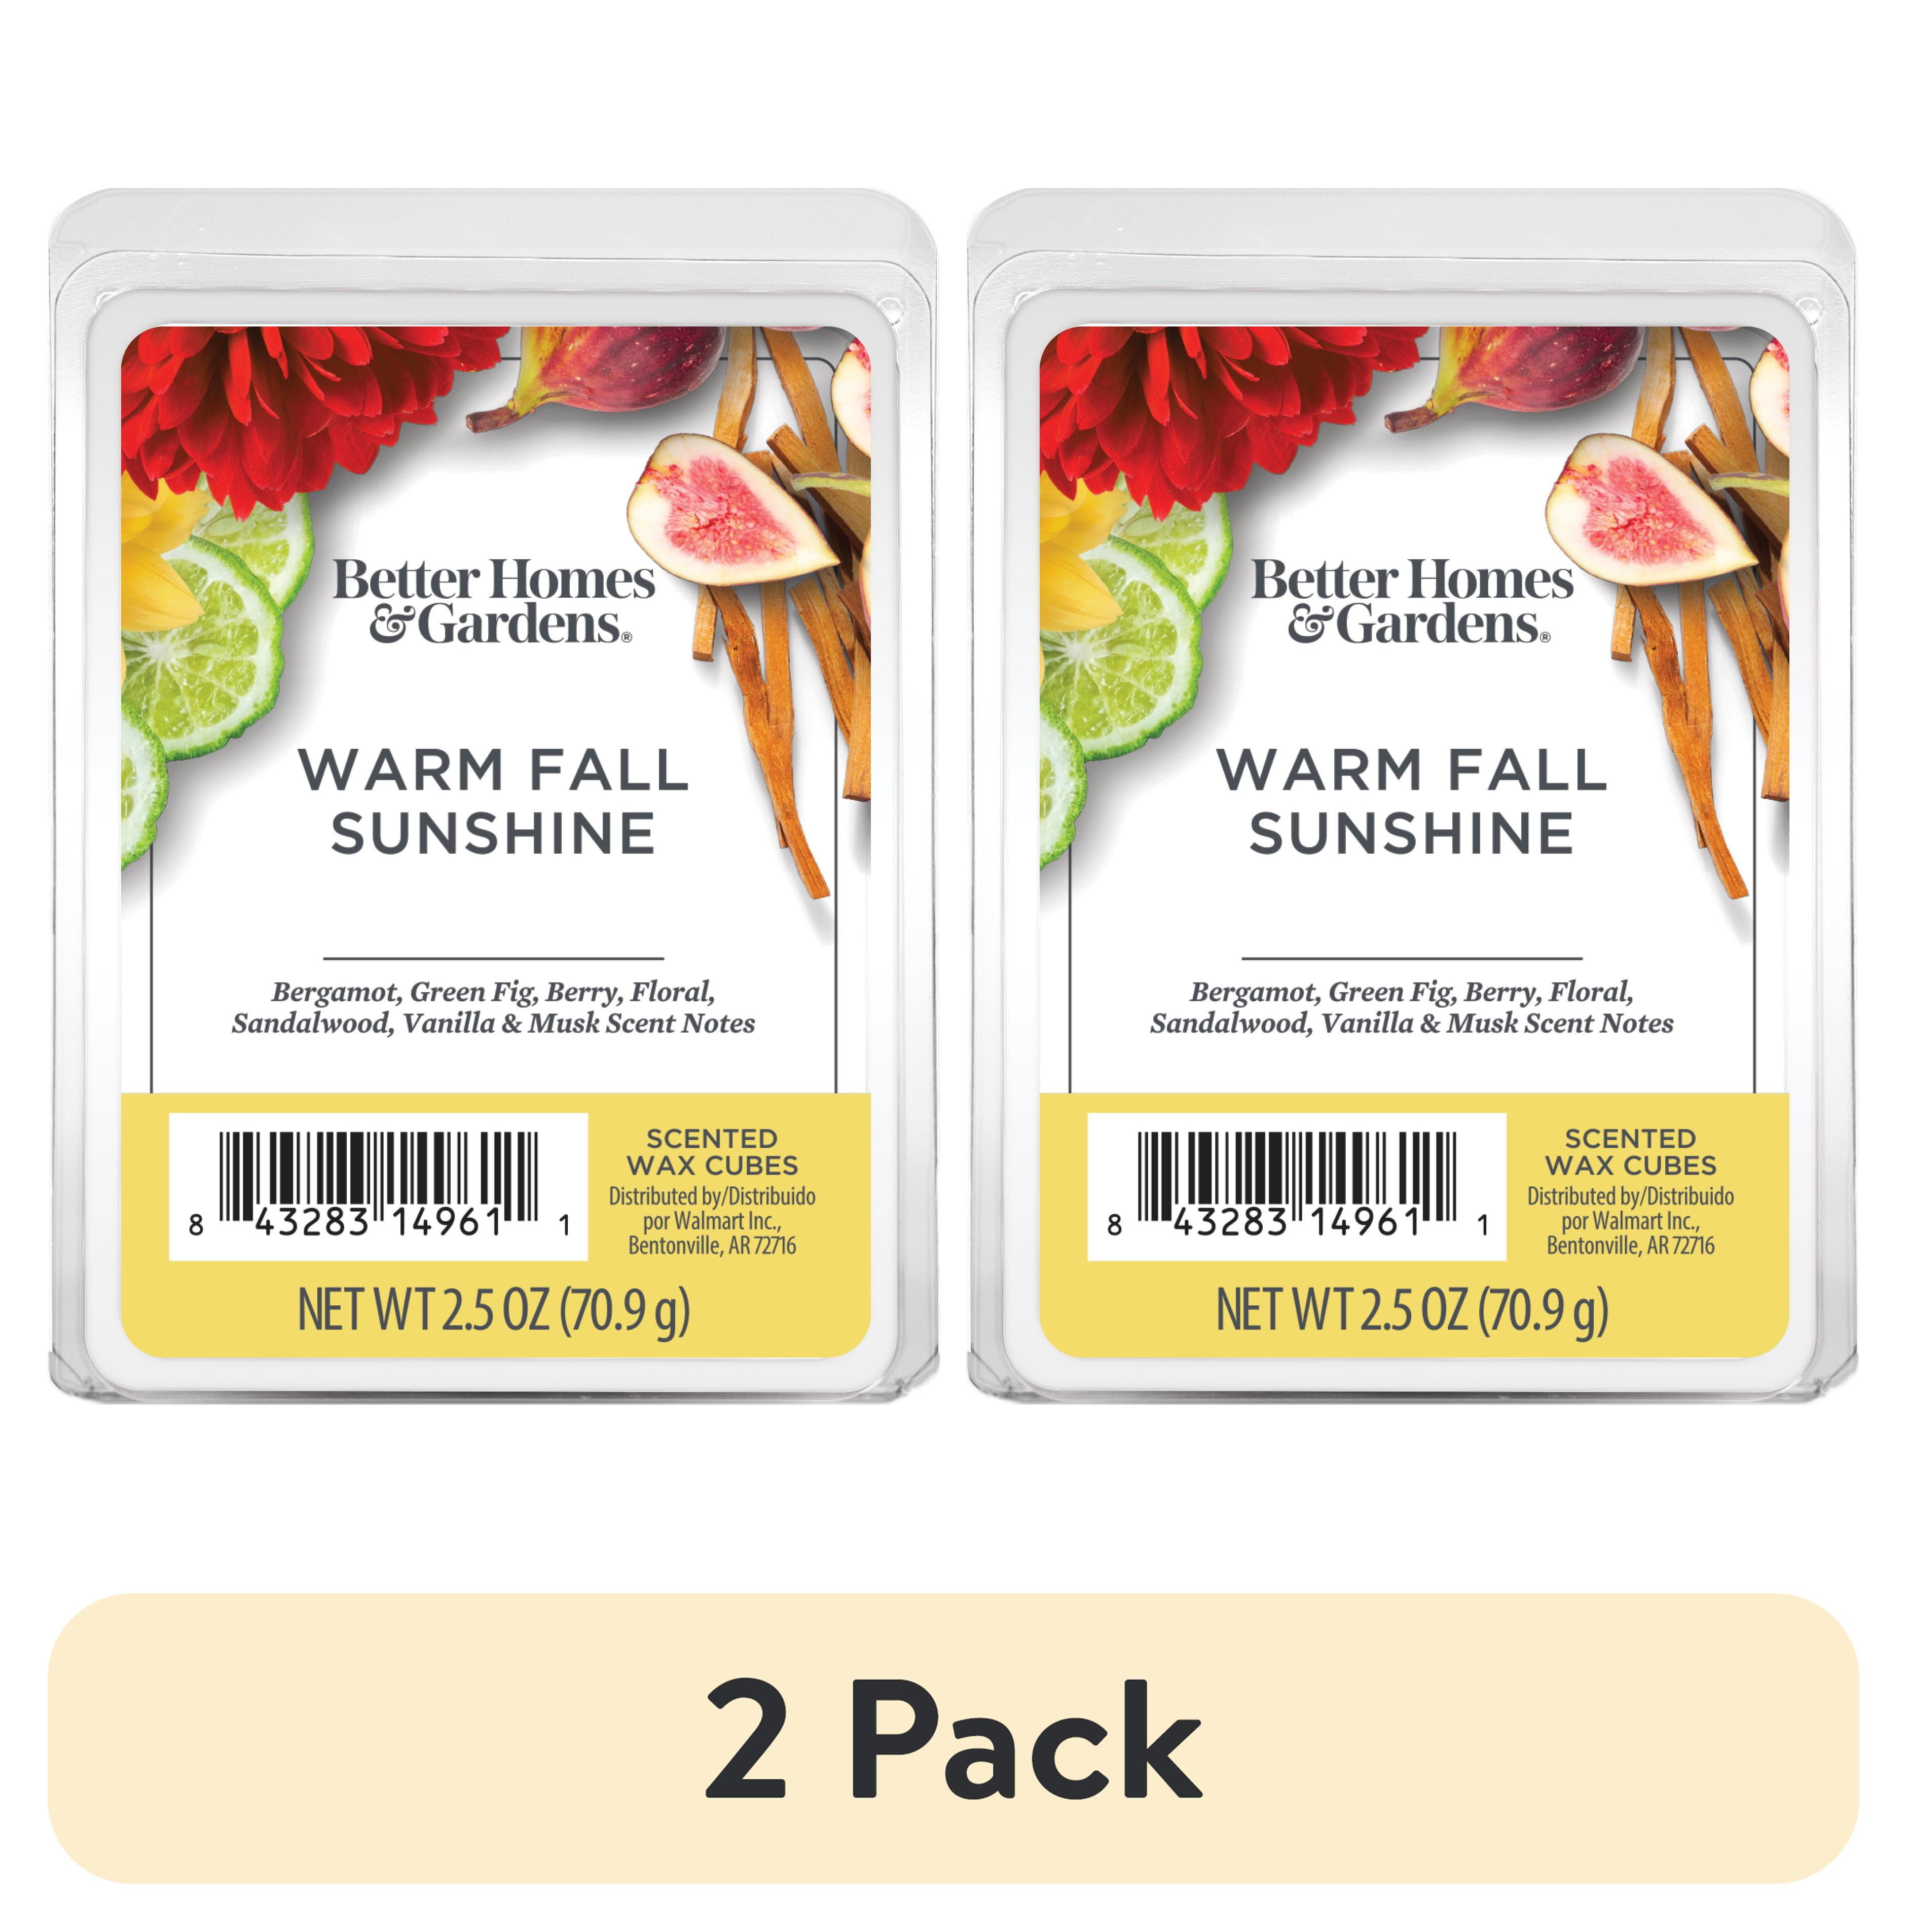 Warm Fall Sunshine Scented Wax Melts, Better Homes and Gardens, 2.5 oz (1- Pack) 